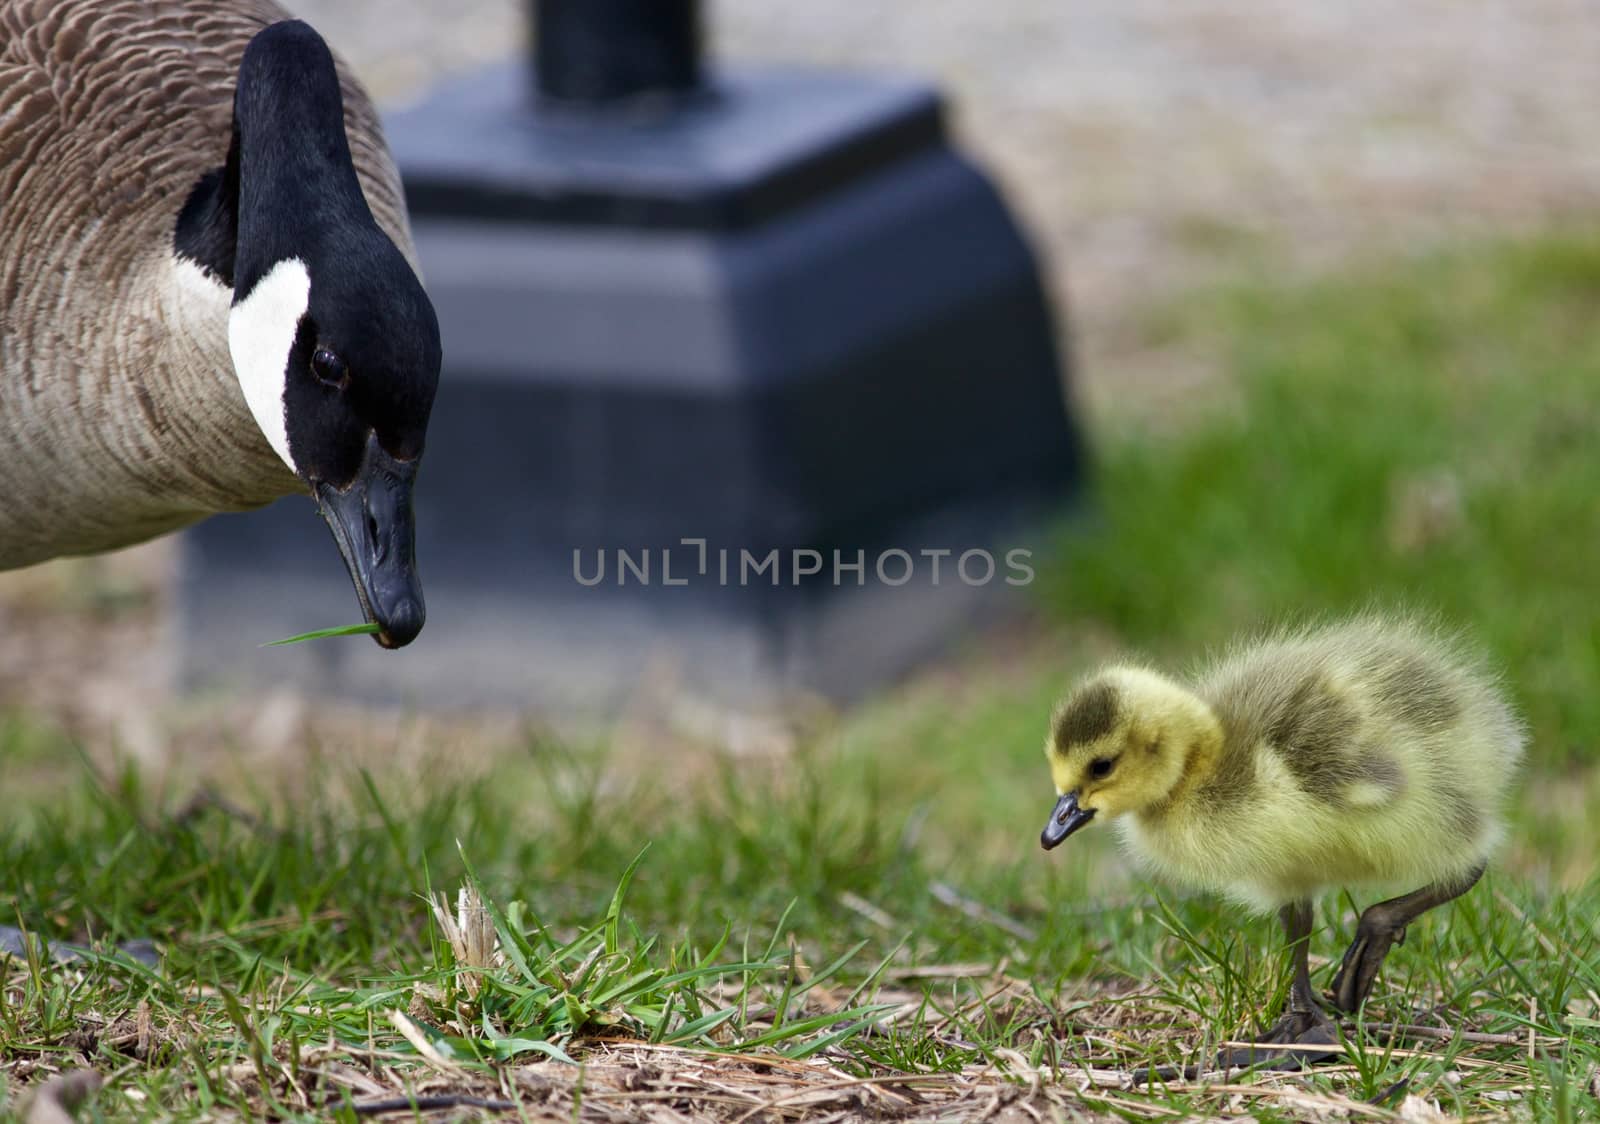 Beautiful image with a chick of the Canada geese and his mom on the grass